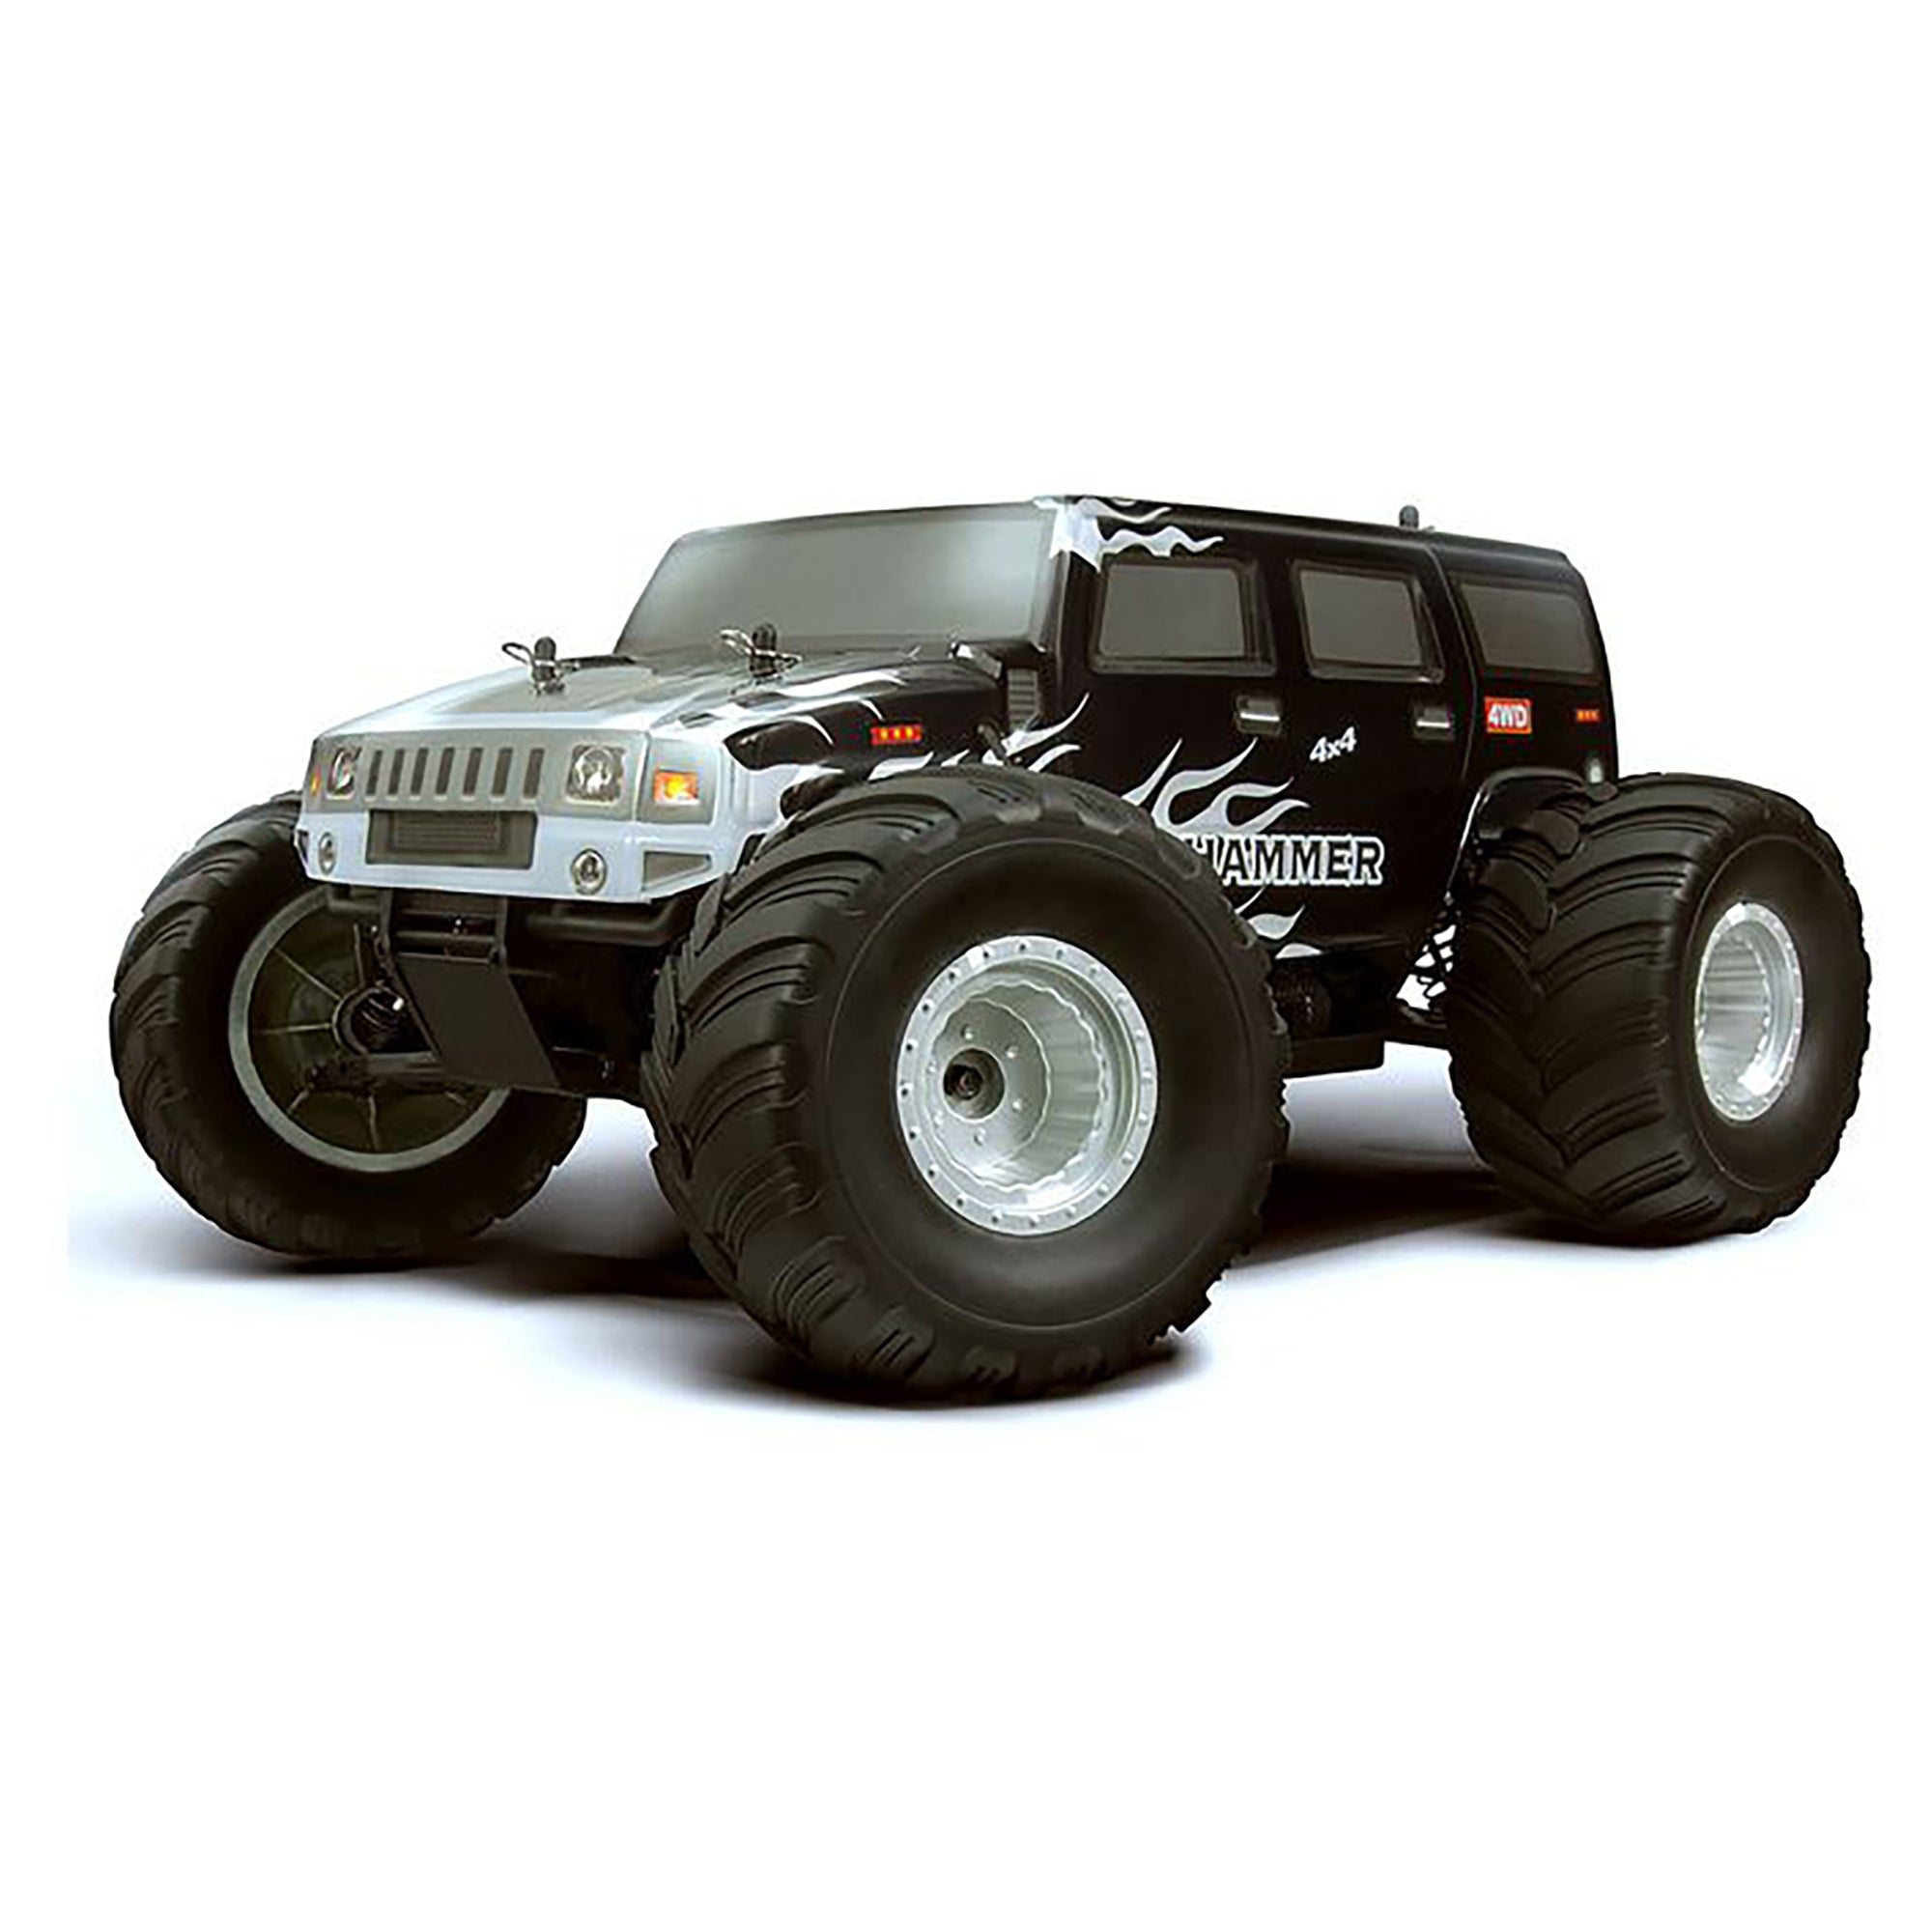 HSP Racing Hummer Monster Truck 94111 2.4Ghz Electric 4WD Off Road RTR RC Truck